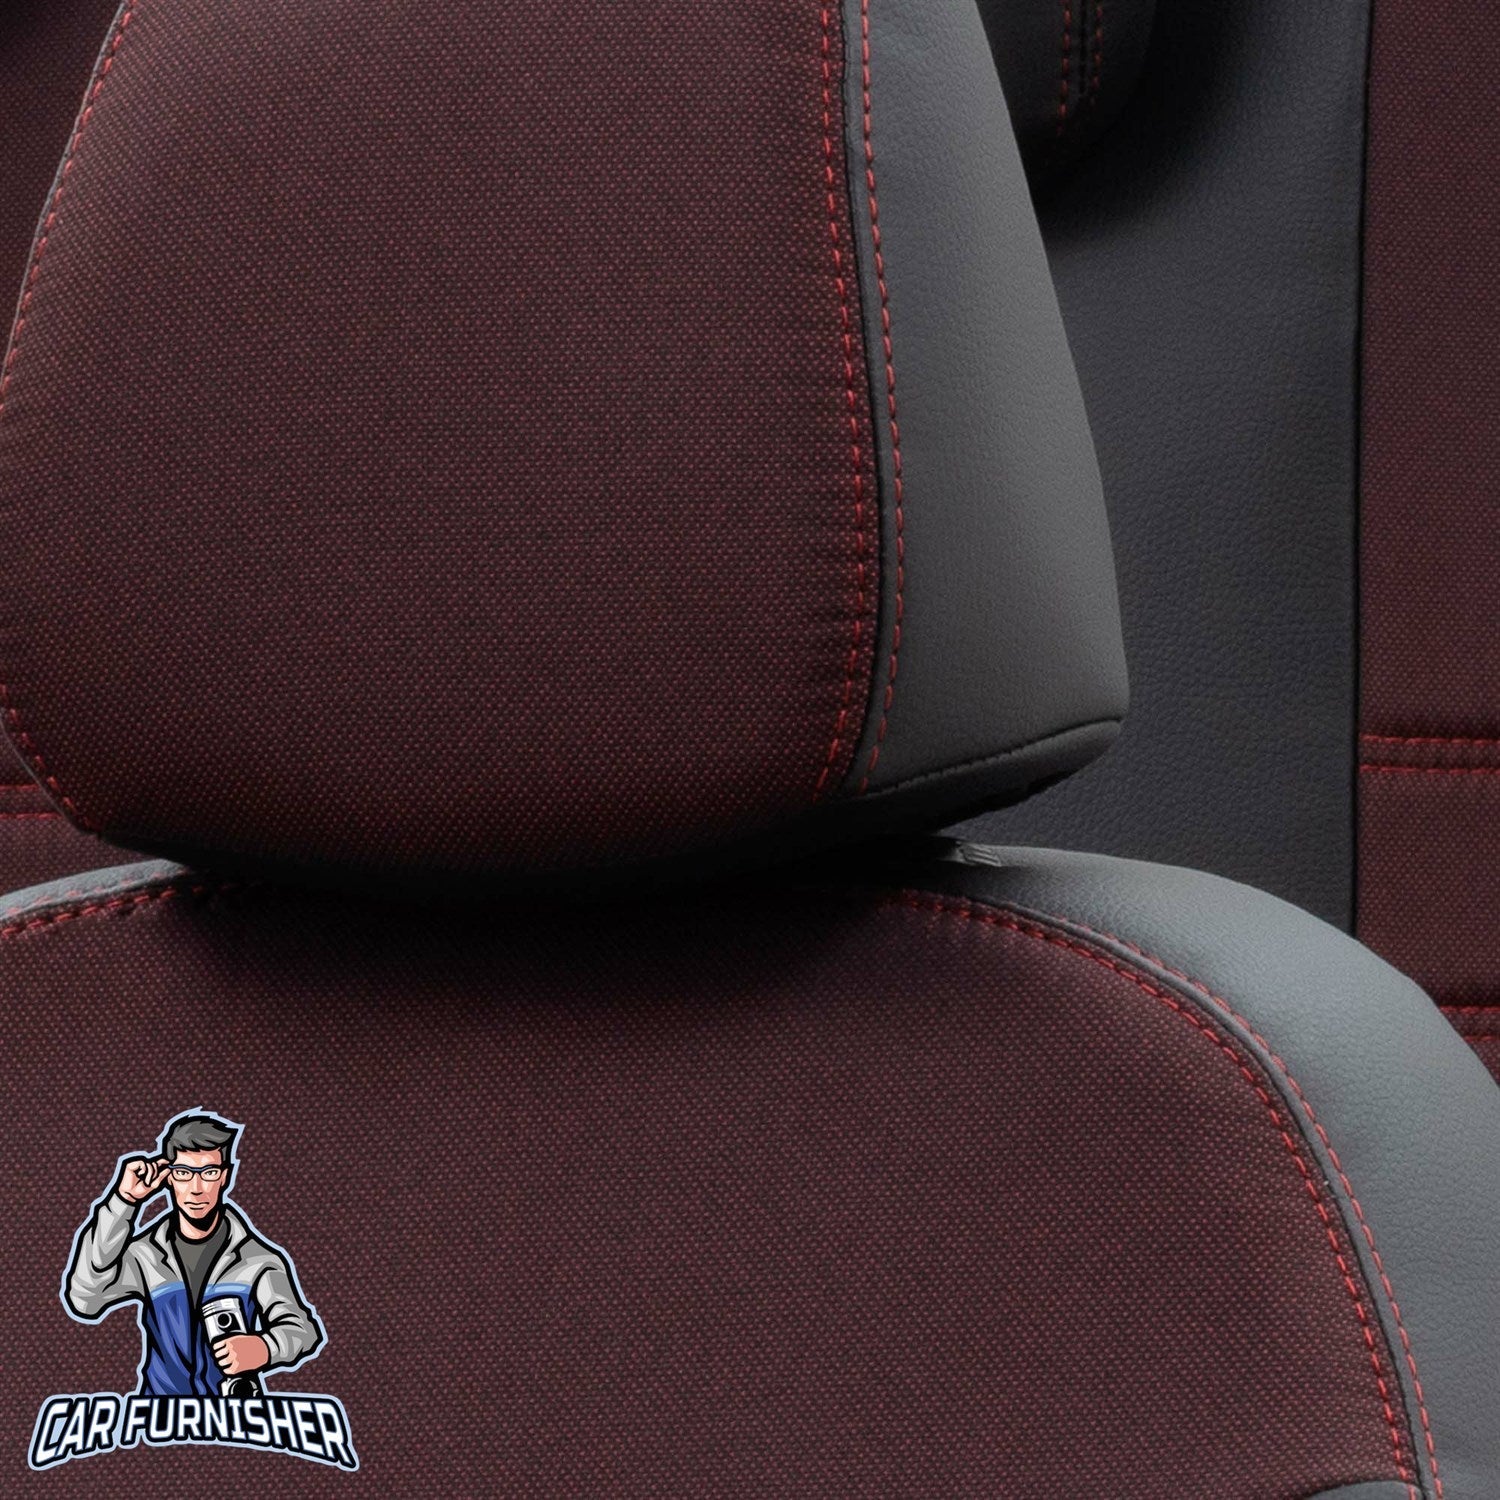 Nissan X-Trail Seat Covers Paris Leather & Jacquard Design Red Leather & Jacquard Fabric